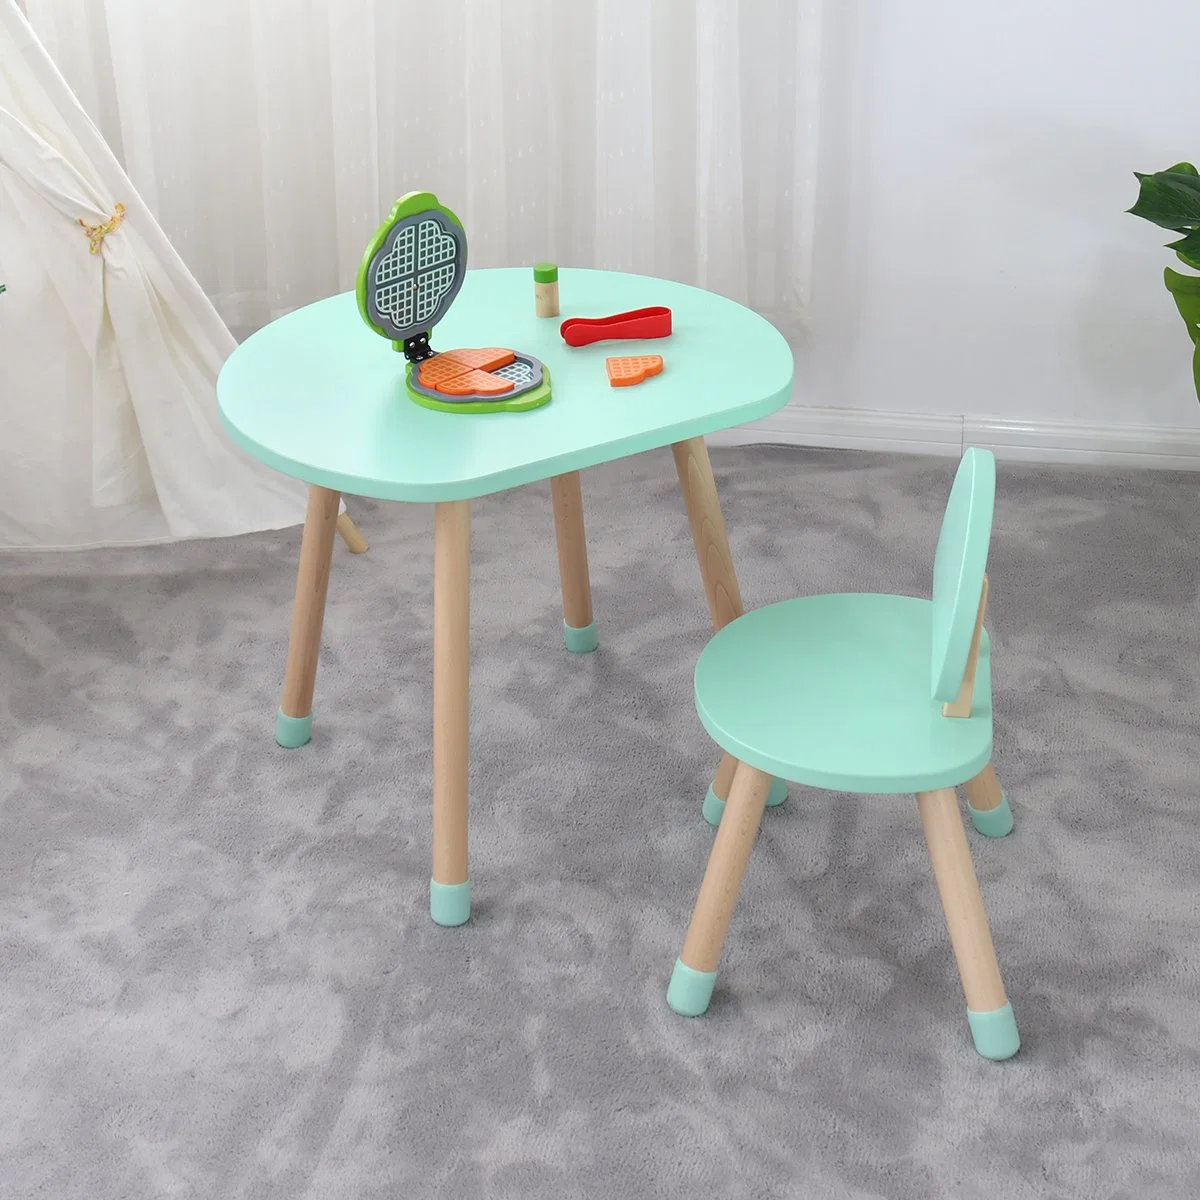 Ins Wooden Table and Chairs Preschool Kids Furniture Sets Reading Table and Chairs Set for Kids